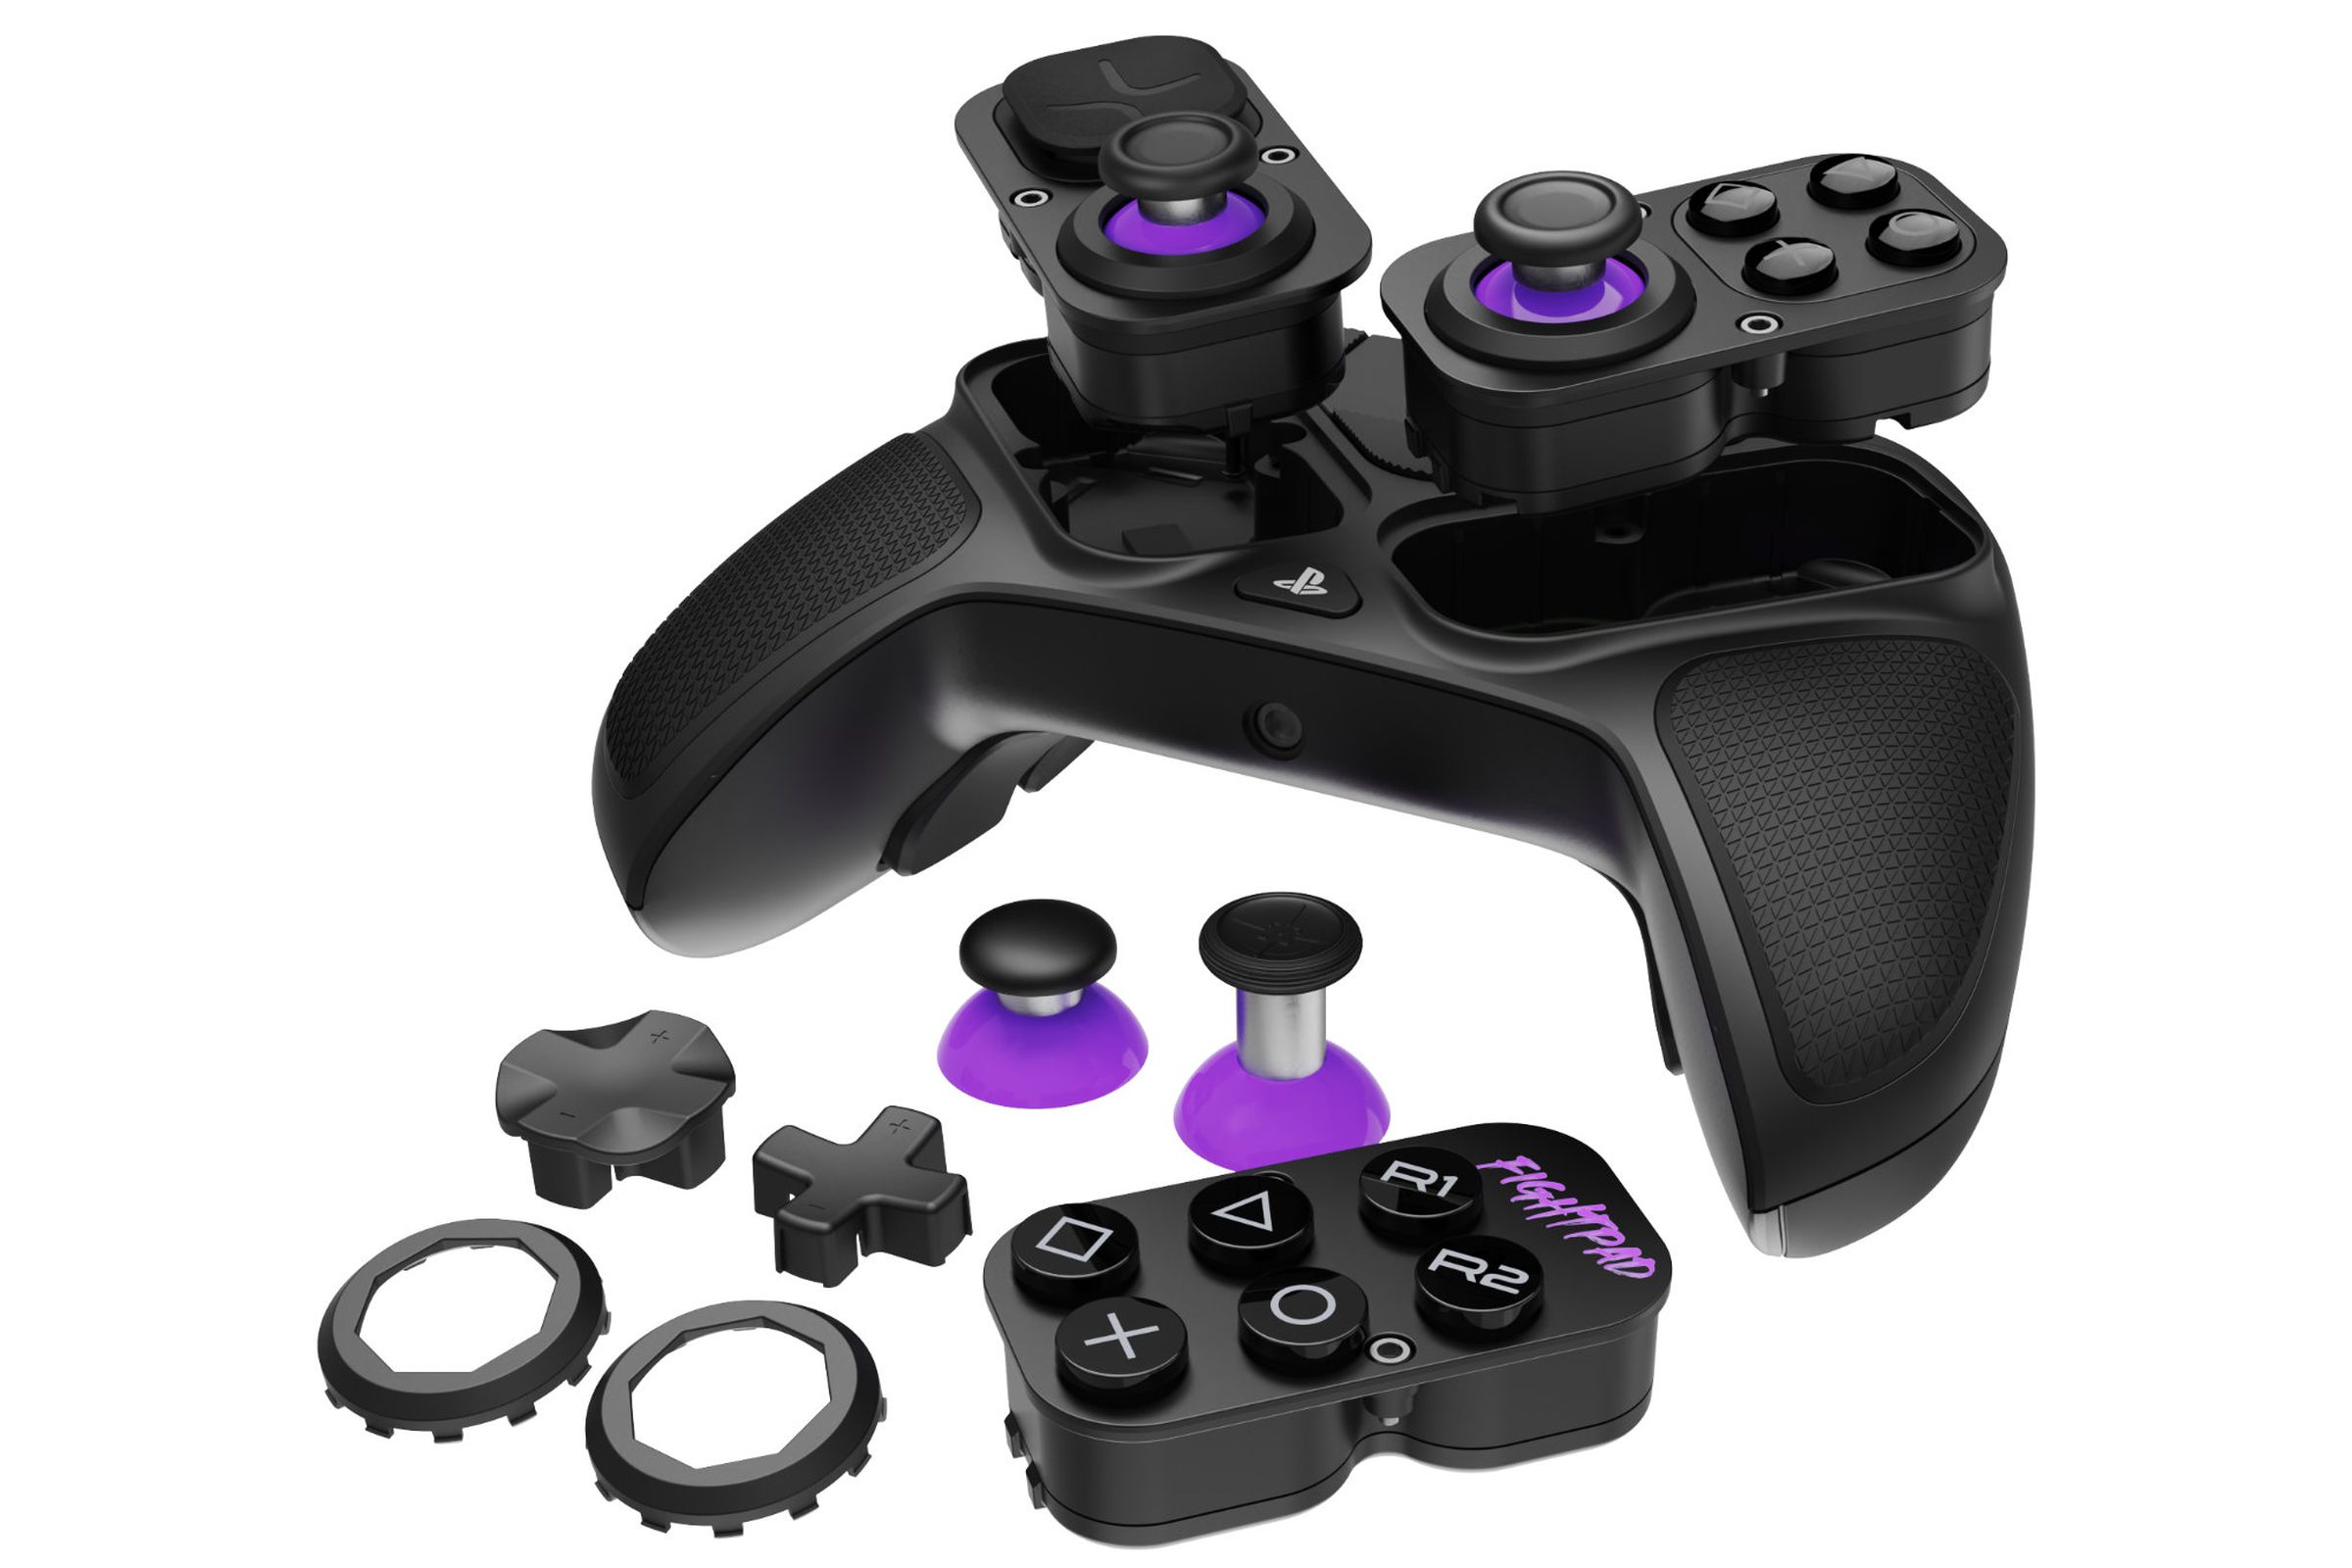 PDP Victrix Pro BFG controller shown with all of the components that come included with purchase, including